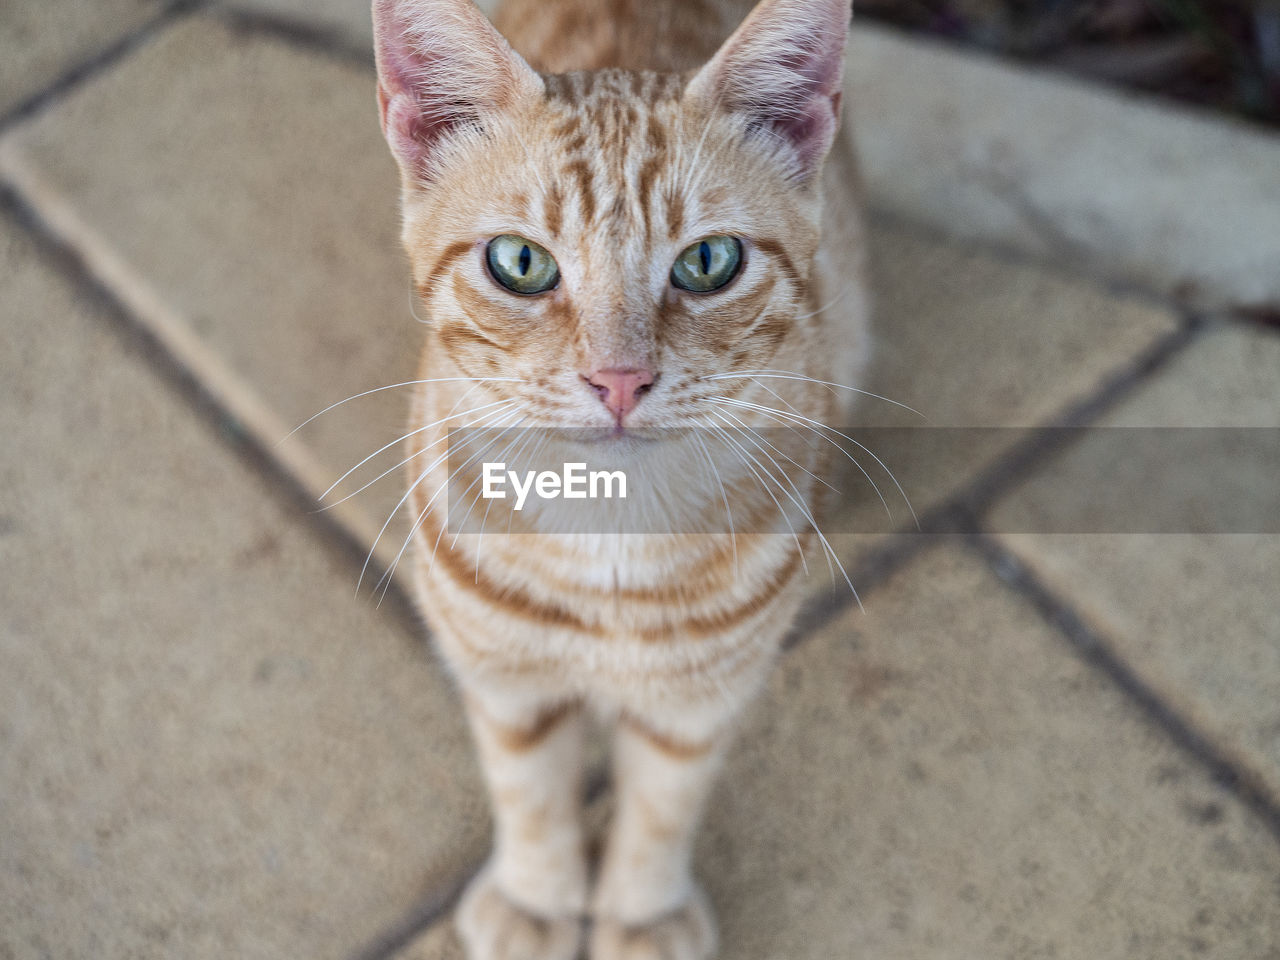 cat, pet, animal themes, animal, mammal, domestic animals, domestic cat, feline, one animal, looking at camera, portrait, whiskers, small to medium-sized cats, felidae, tabby cat, no people, high angle view, carnivore, kitten, day, close-up, footpath